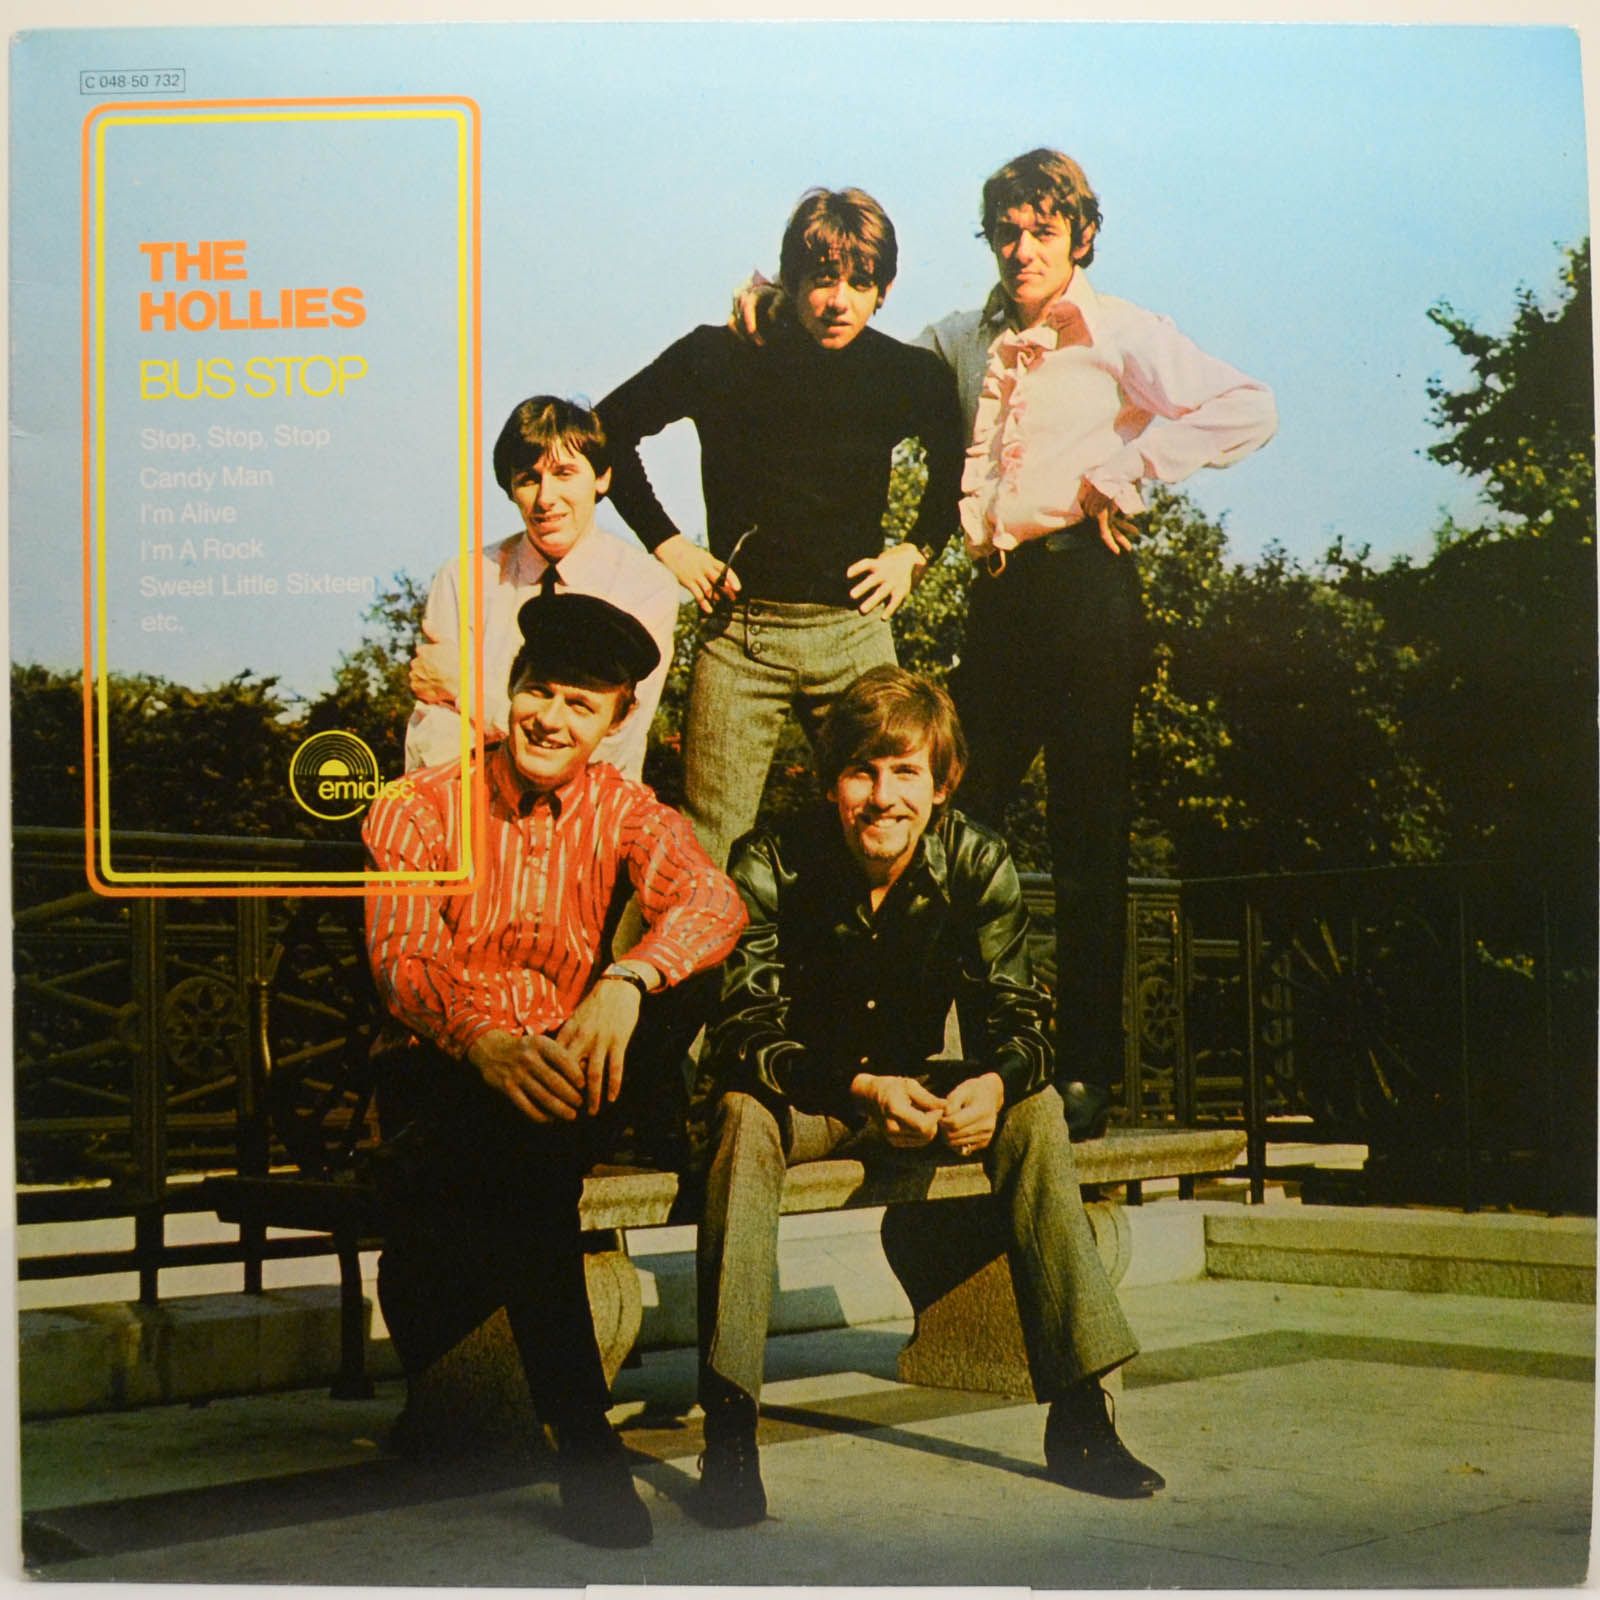 The Hollies — Bus Stop, 1970